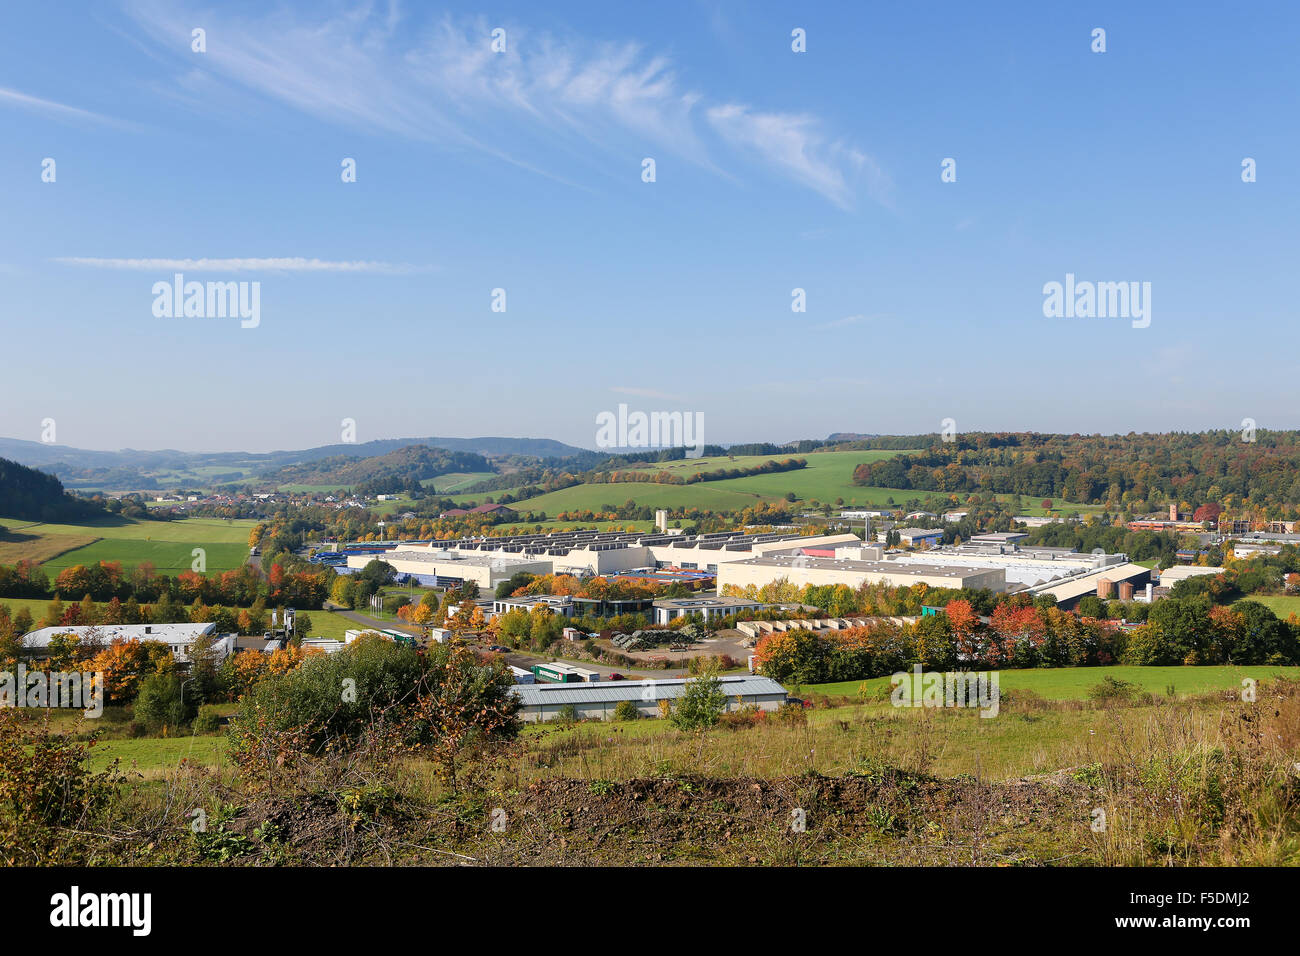 GEROLSTEIN, GERMANY - OCTOBER 11, 2015: The main factory of Gerolsteiner Brunnen, a leading German mineral water firm in the Vul Stock Photo